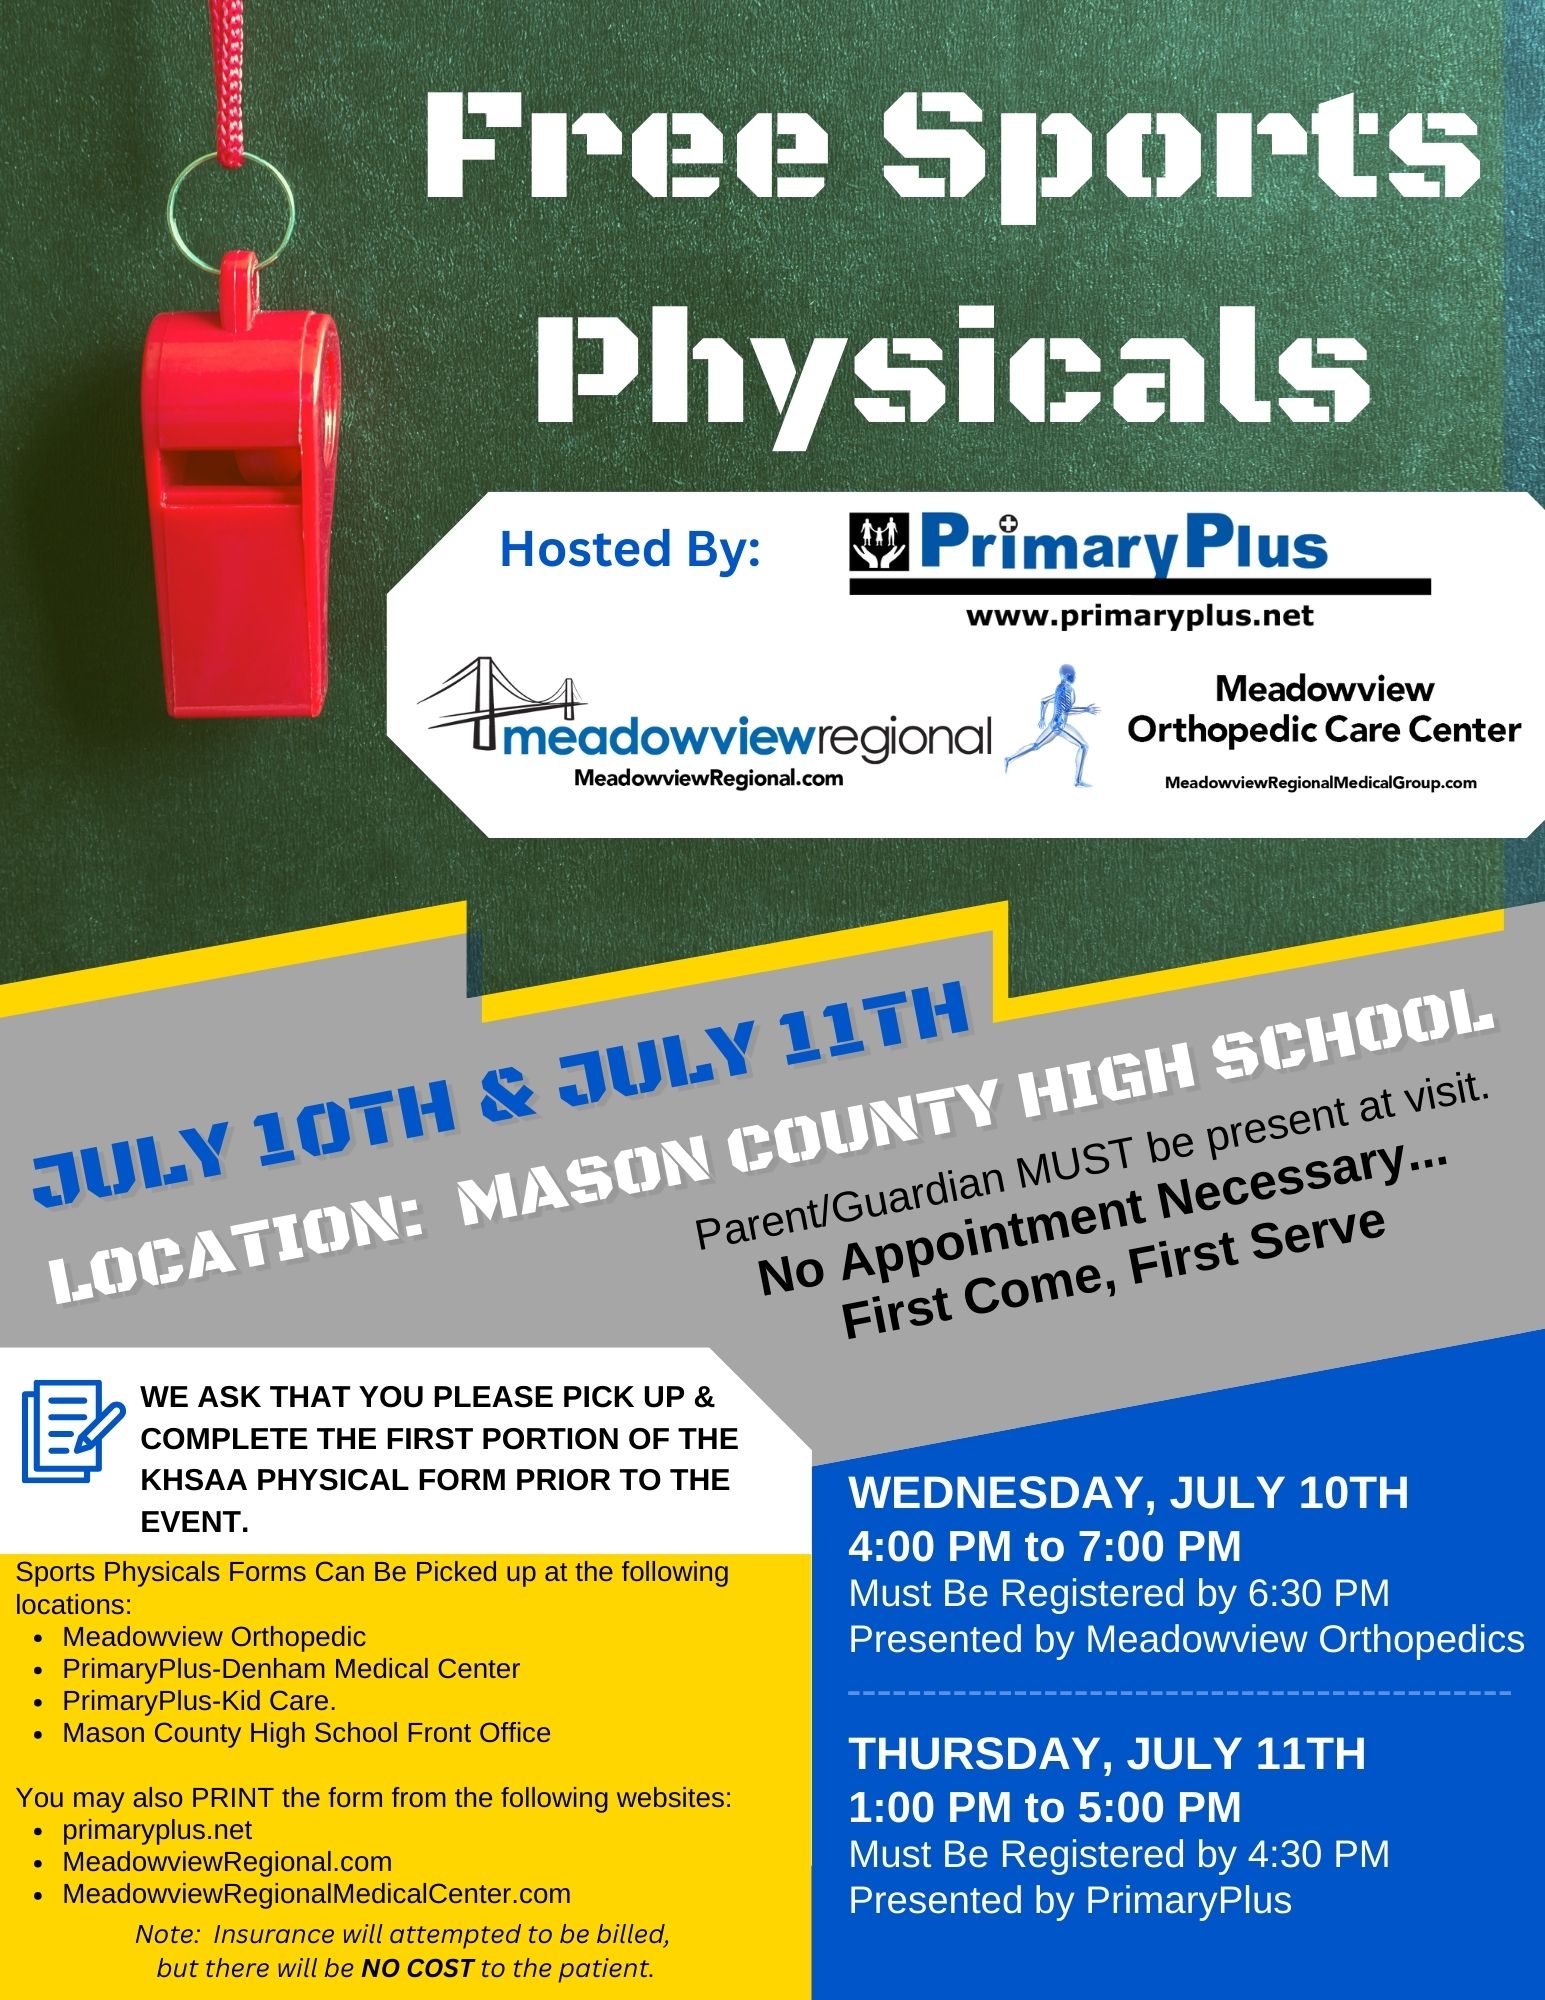 Free Sports Physicals at Mason County High School July 10 & July 11 News